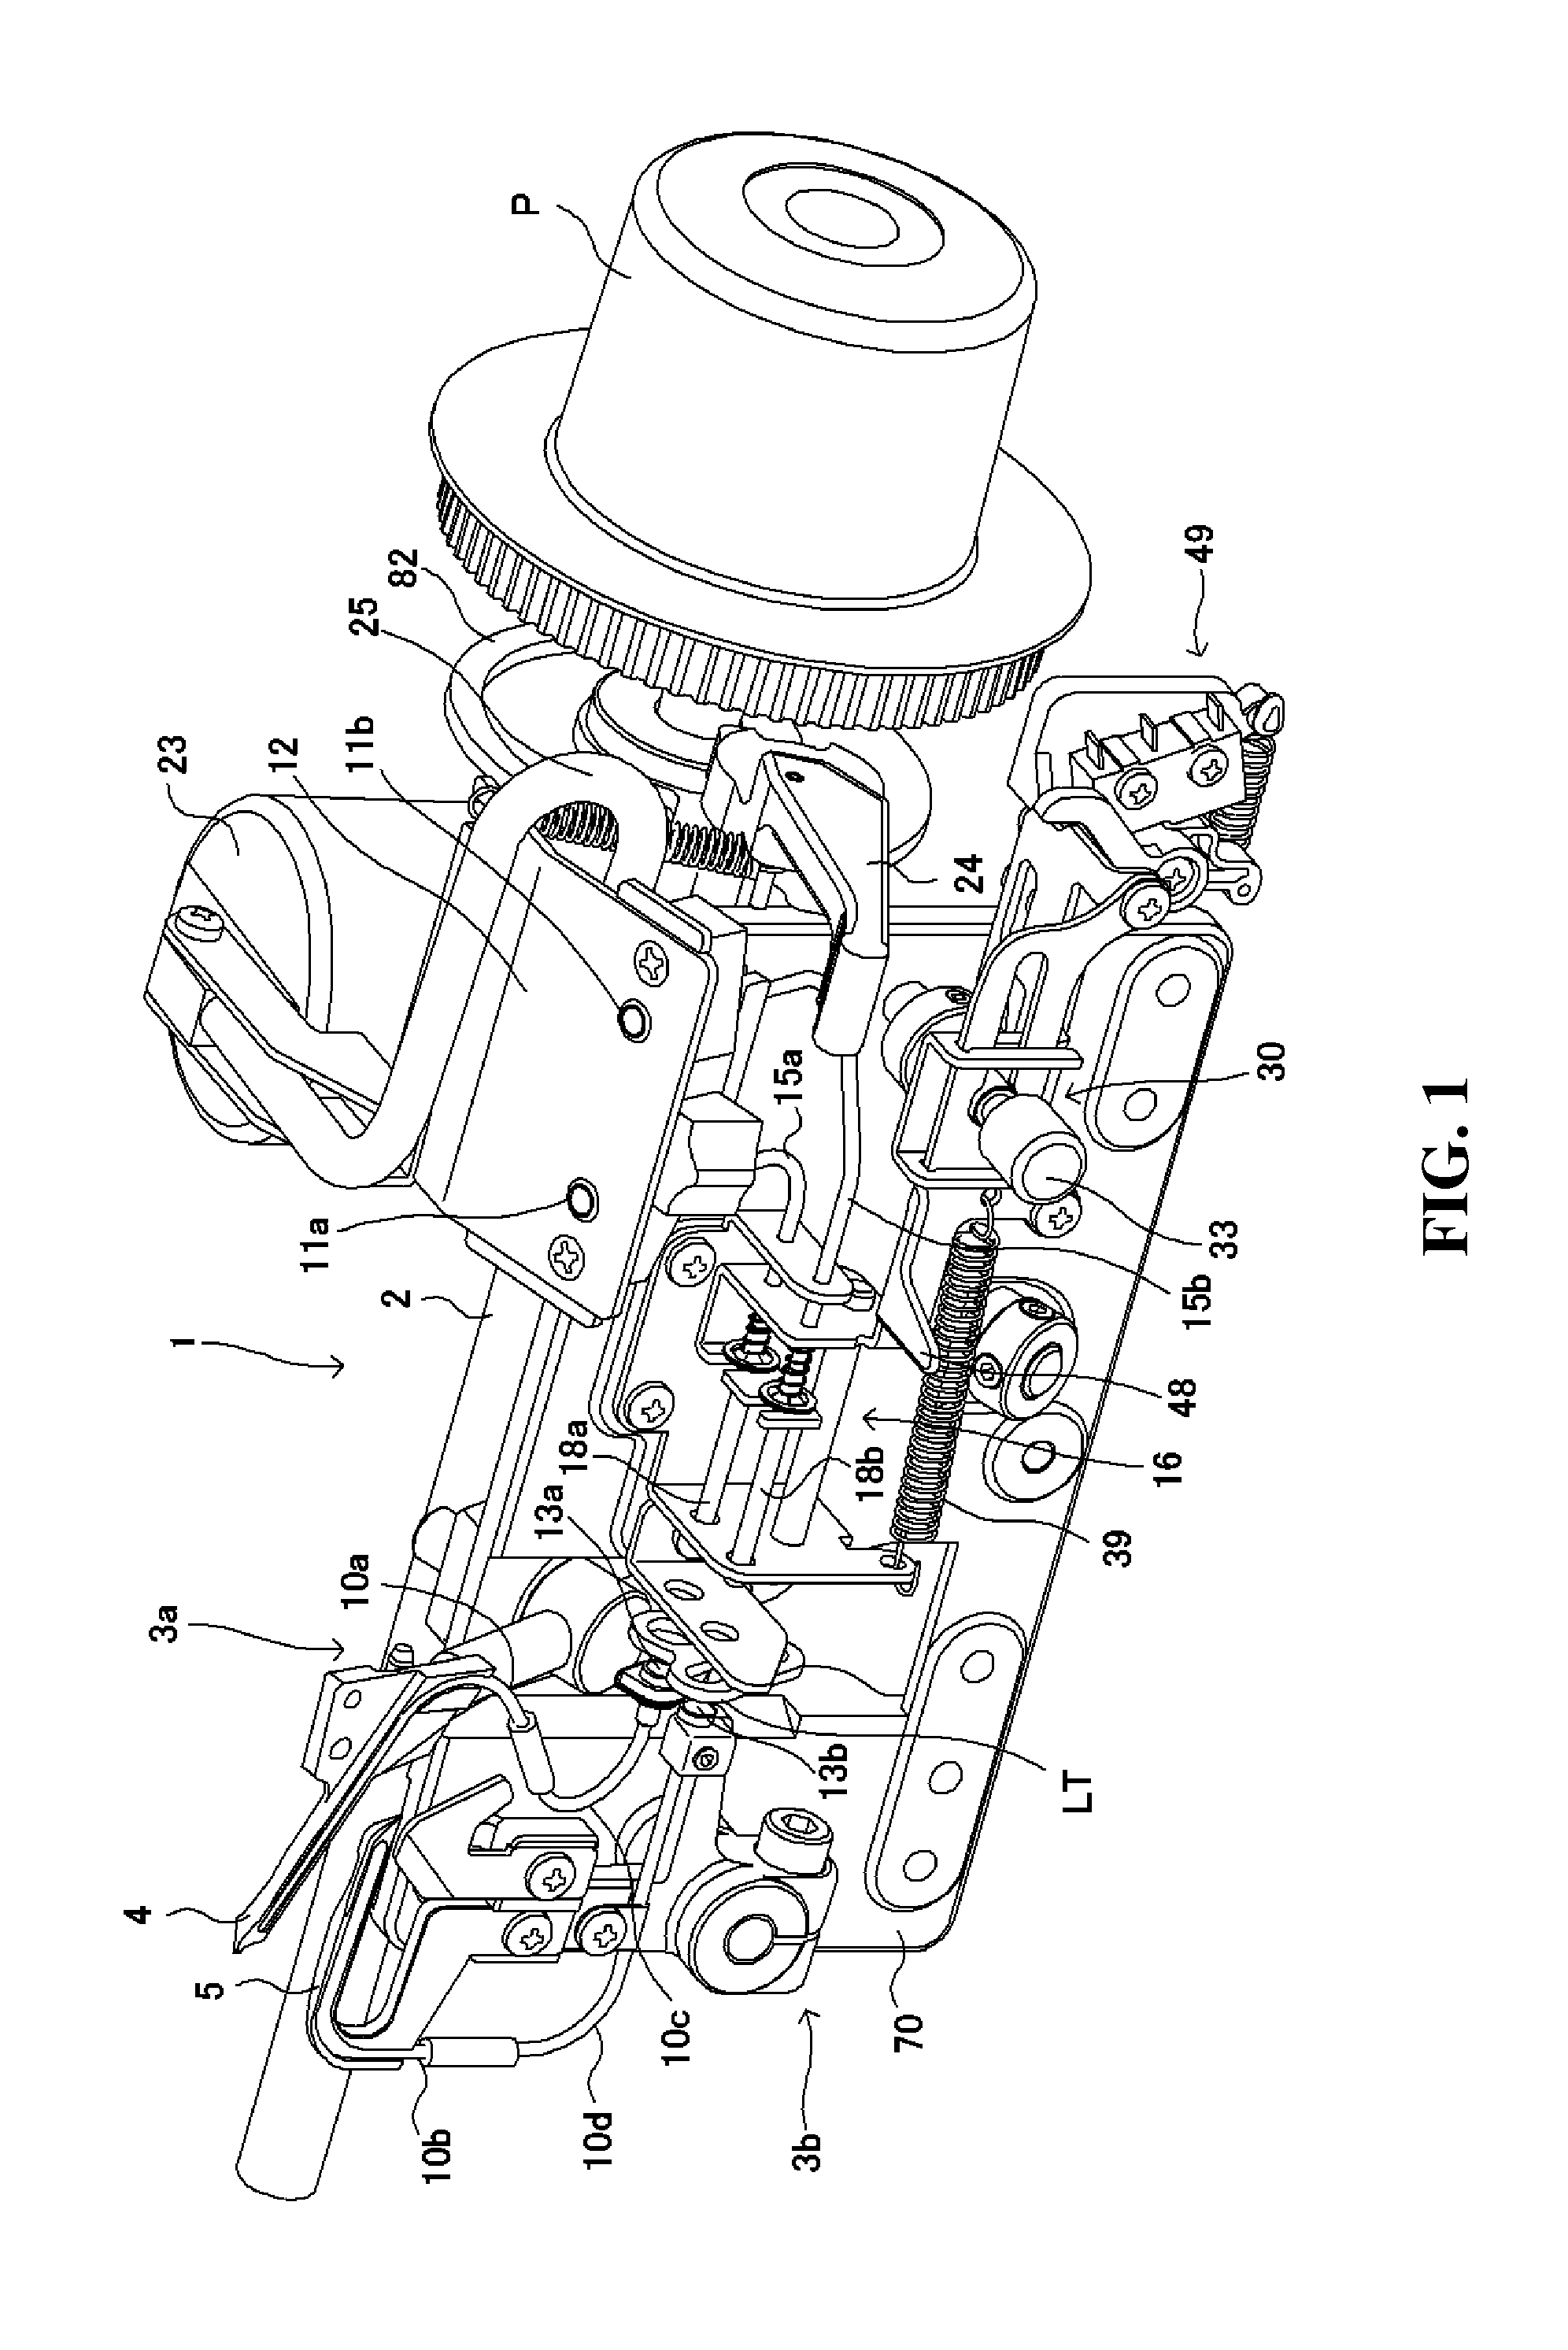 Gas carrying threading device of sewing machine